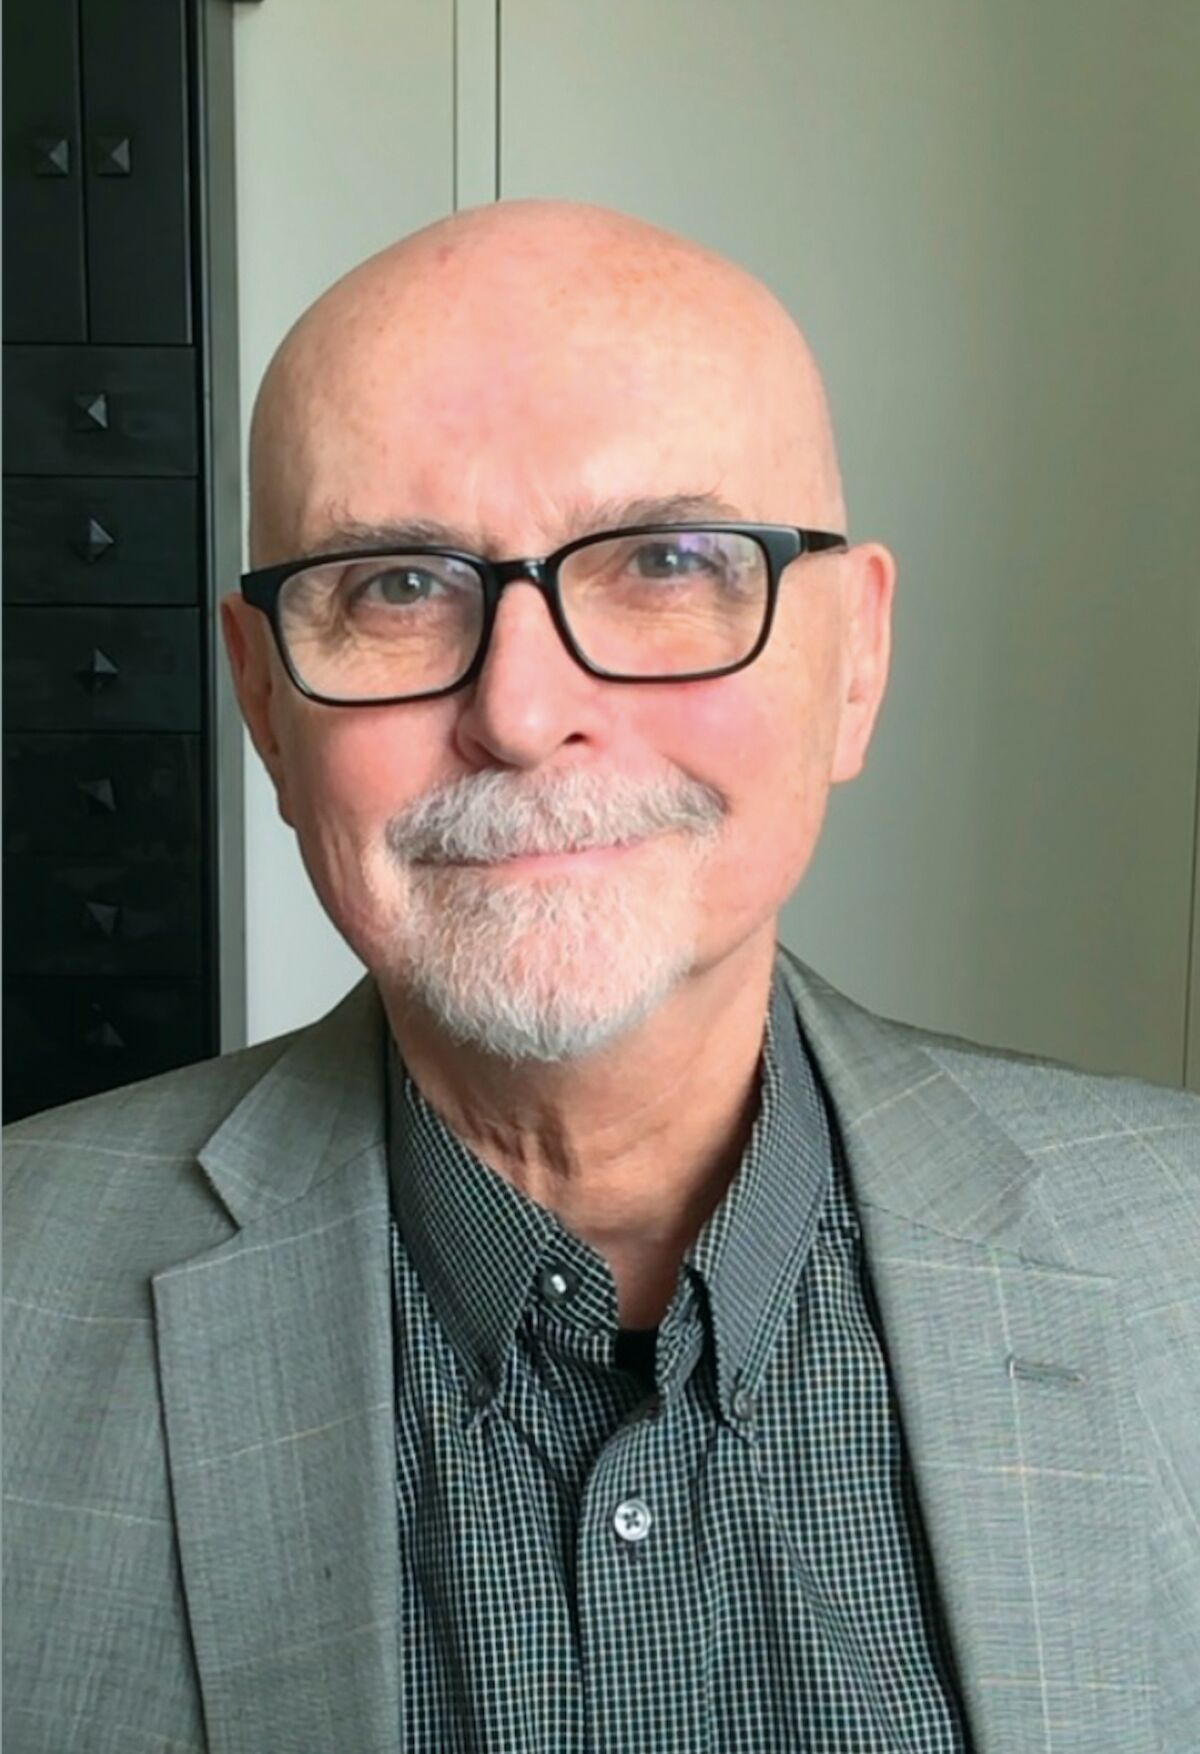 A head of the author , Richard Lacayo. He wears glasses, has a gray beard, is wearing a sport jacket (gray) with a maroon shirt).